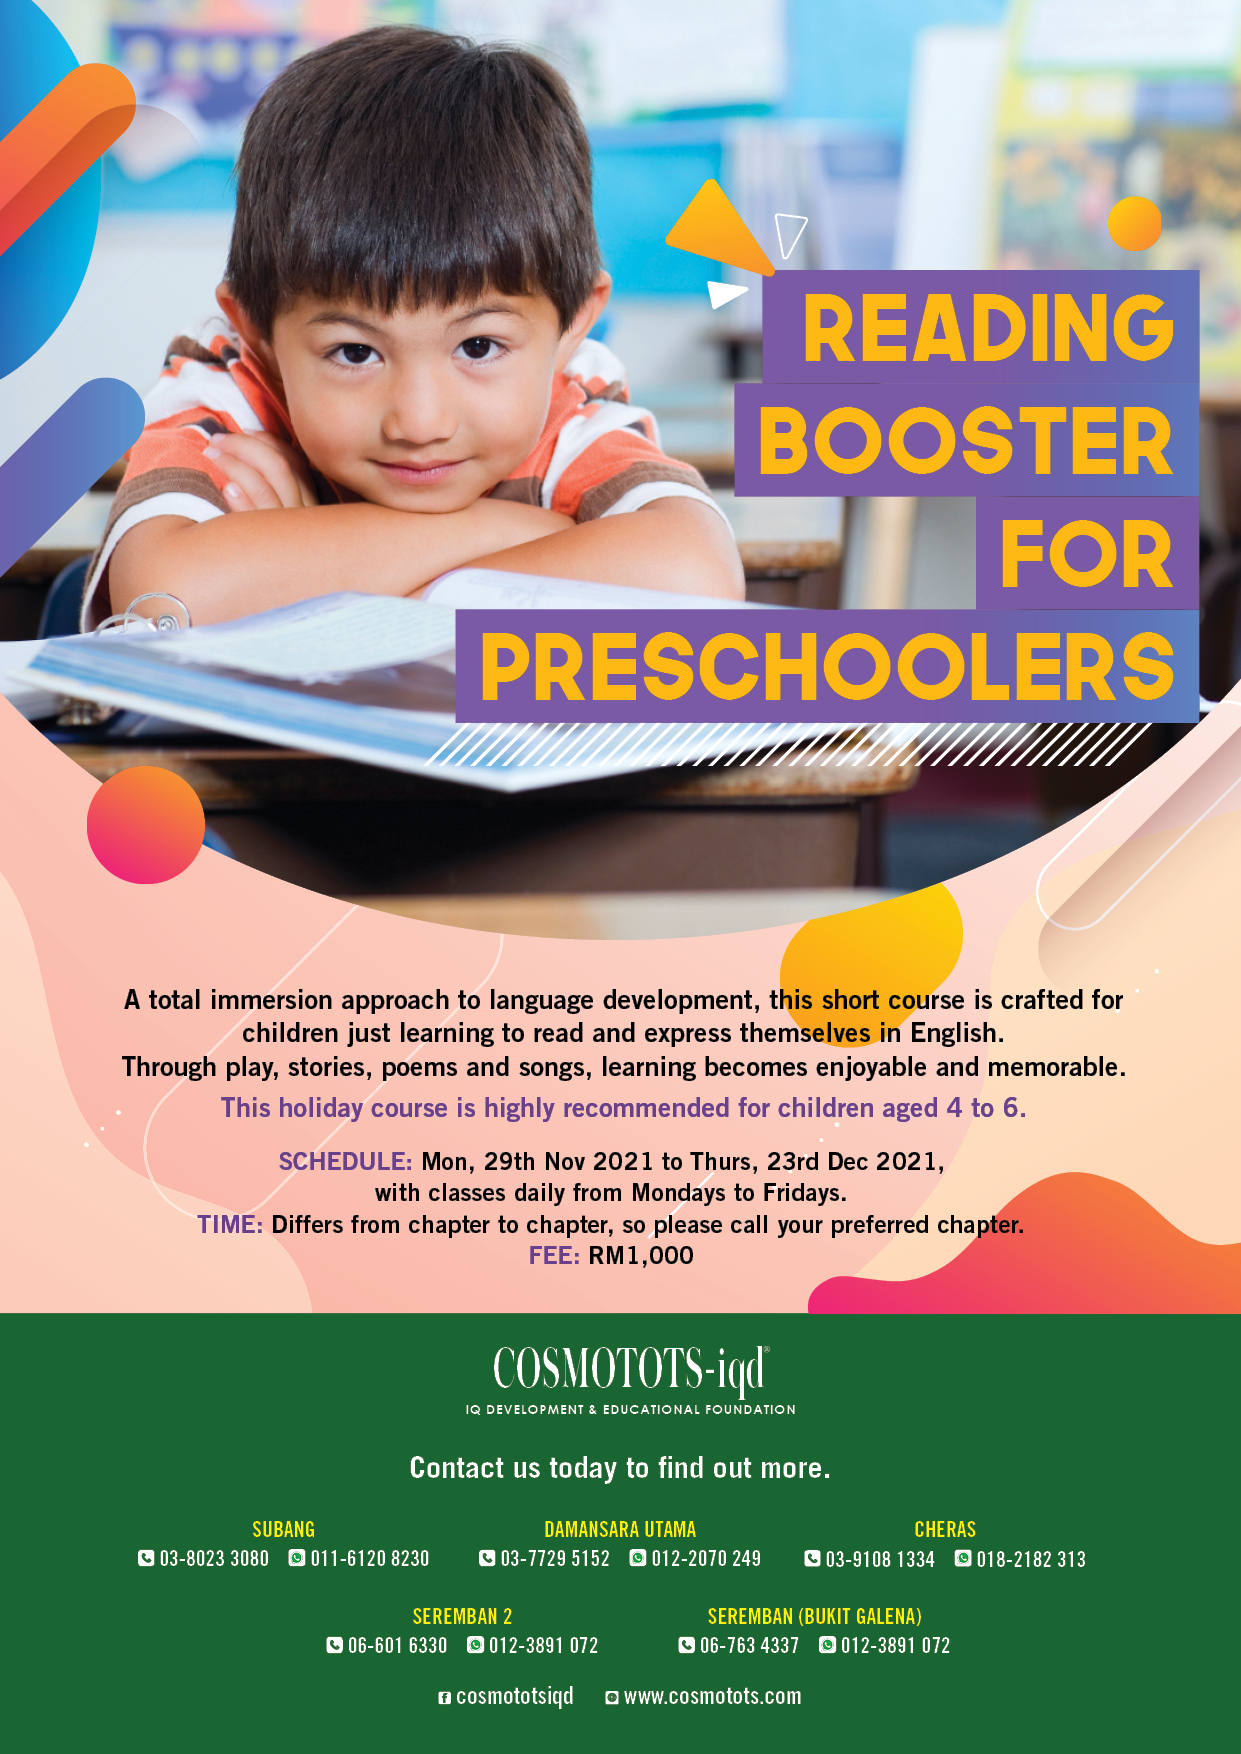 Year-End Holiday Programme Poster_2021_Reading Booster For Preschoolers